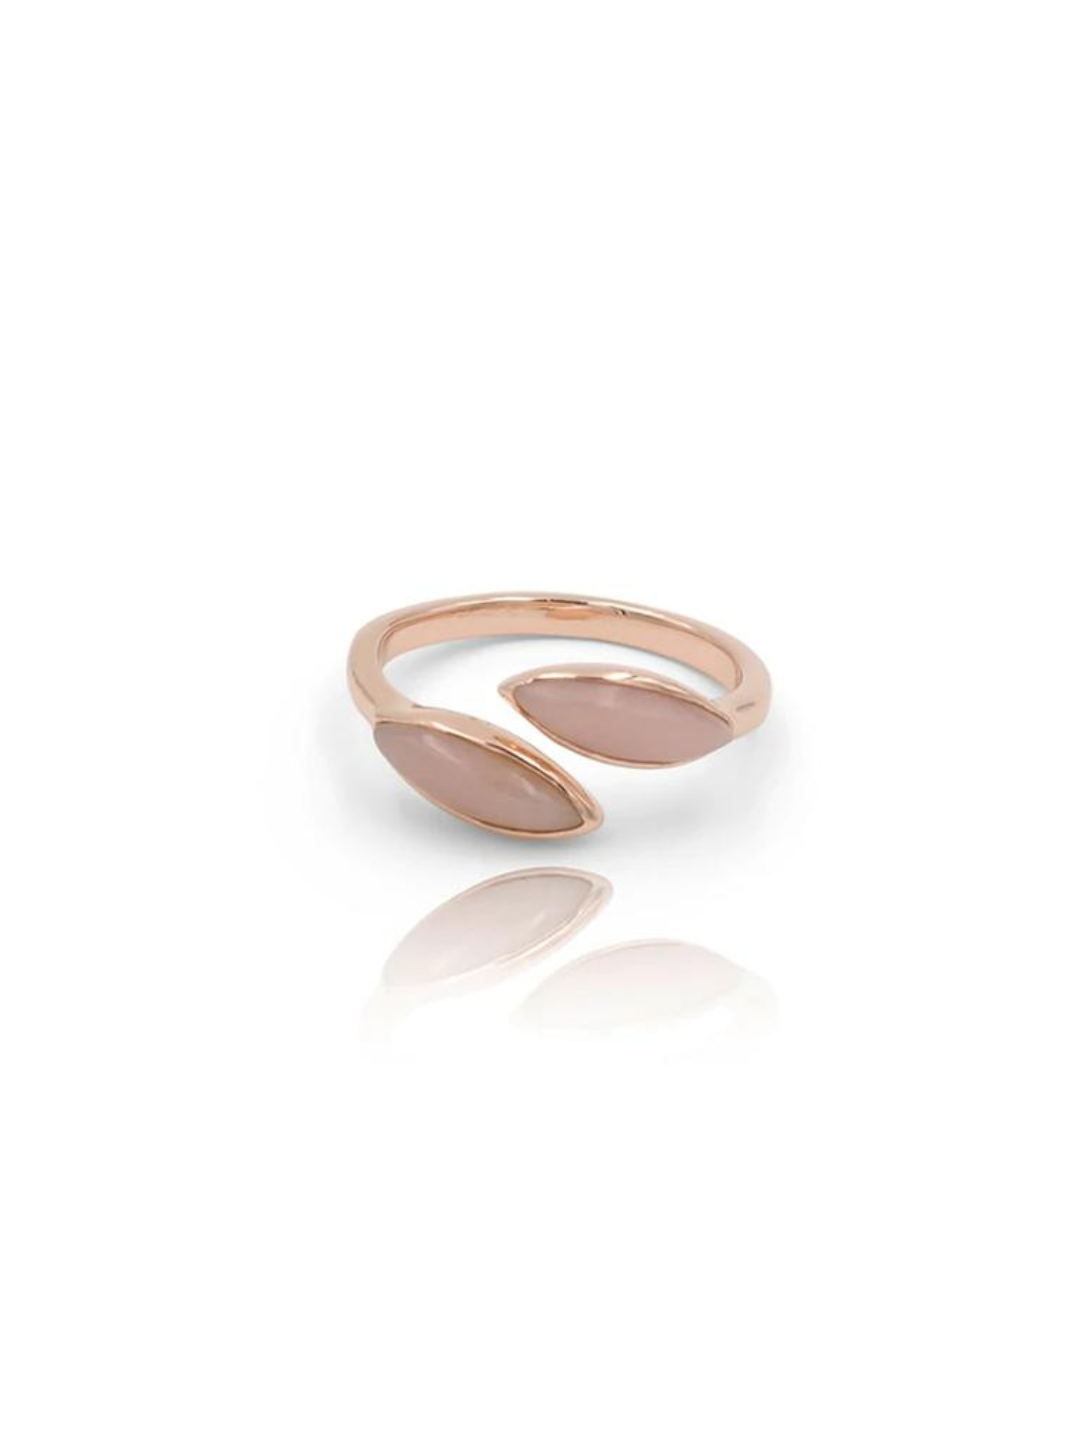 Our rose gold vermeil pink opal midi ring, can be worn on its own as a classic ring, or layered with other jewellery. Made to be worn on any finger with an adjustable band you'll love the blush pink of this natural stone.  ethical handcrafted jewelry sustainable fashion